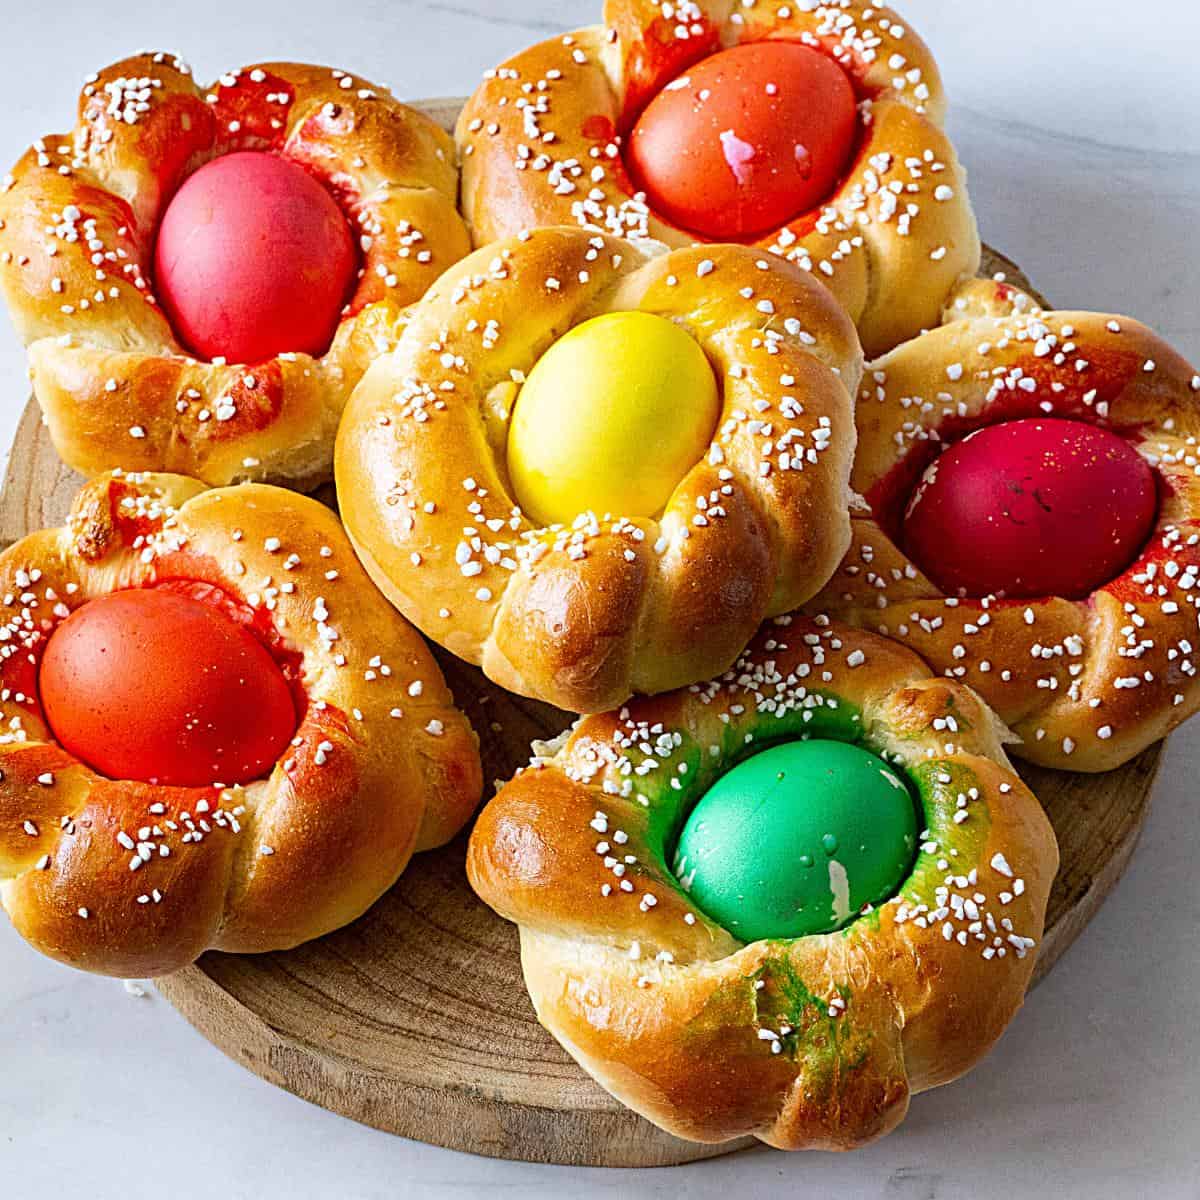 Bread with colored eggs in braided bread.